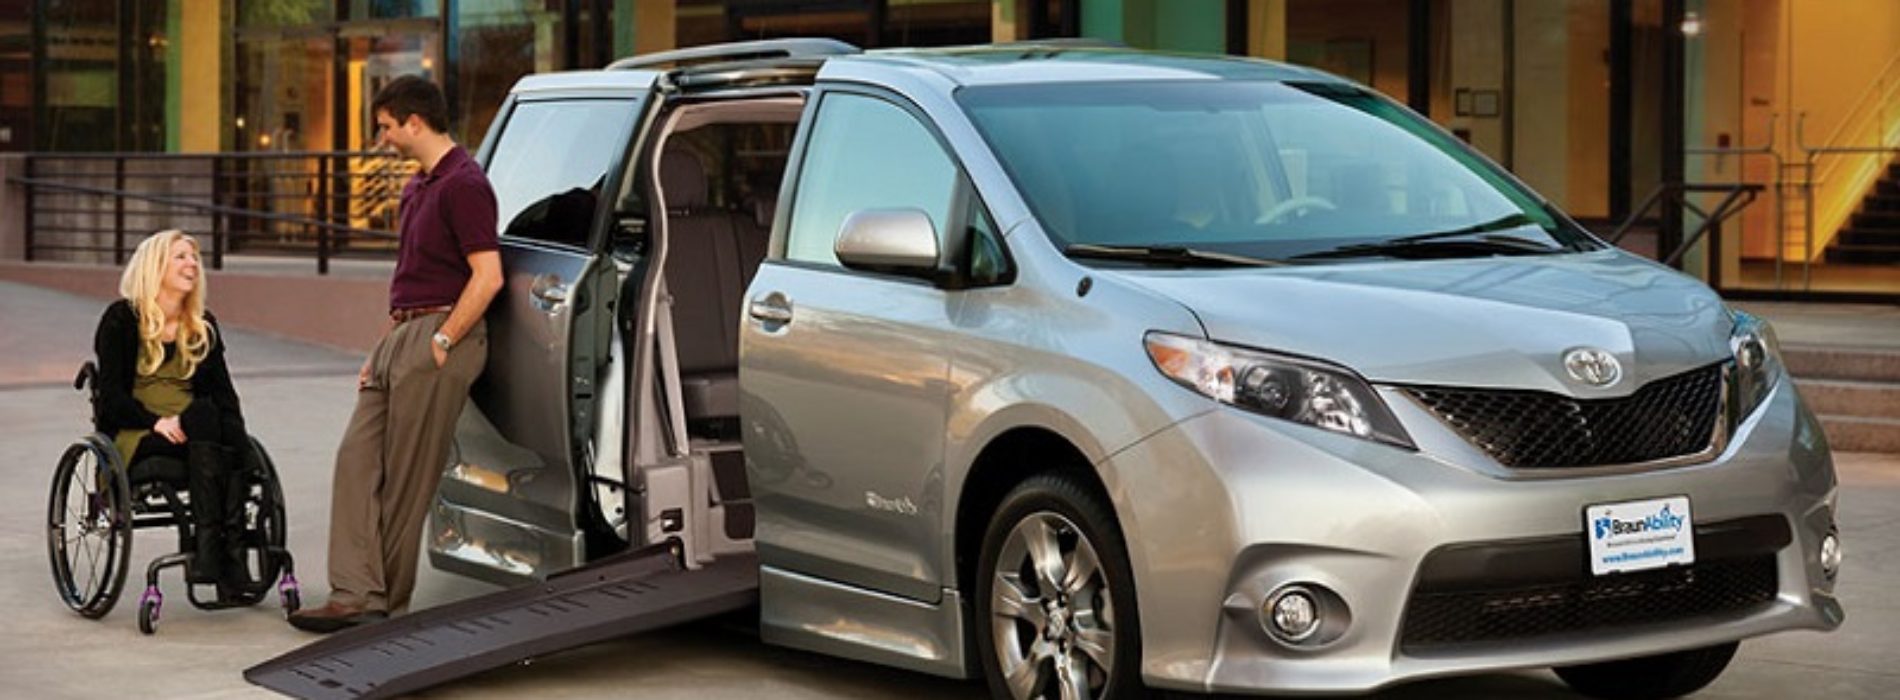 Wheelchair accessible vehicles: how to rent one